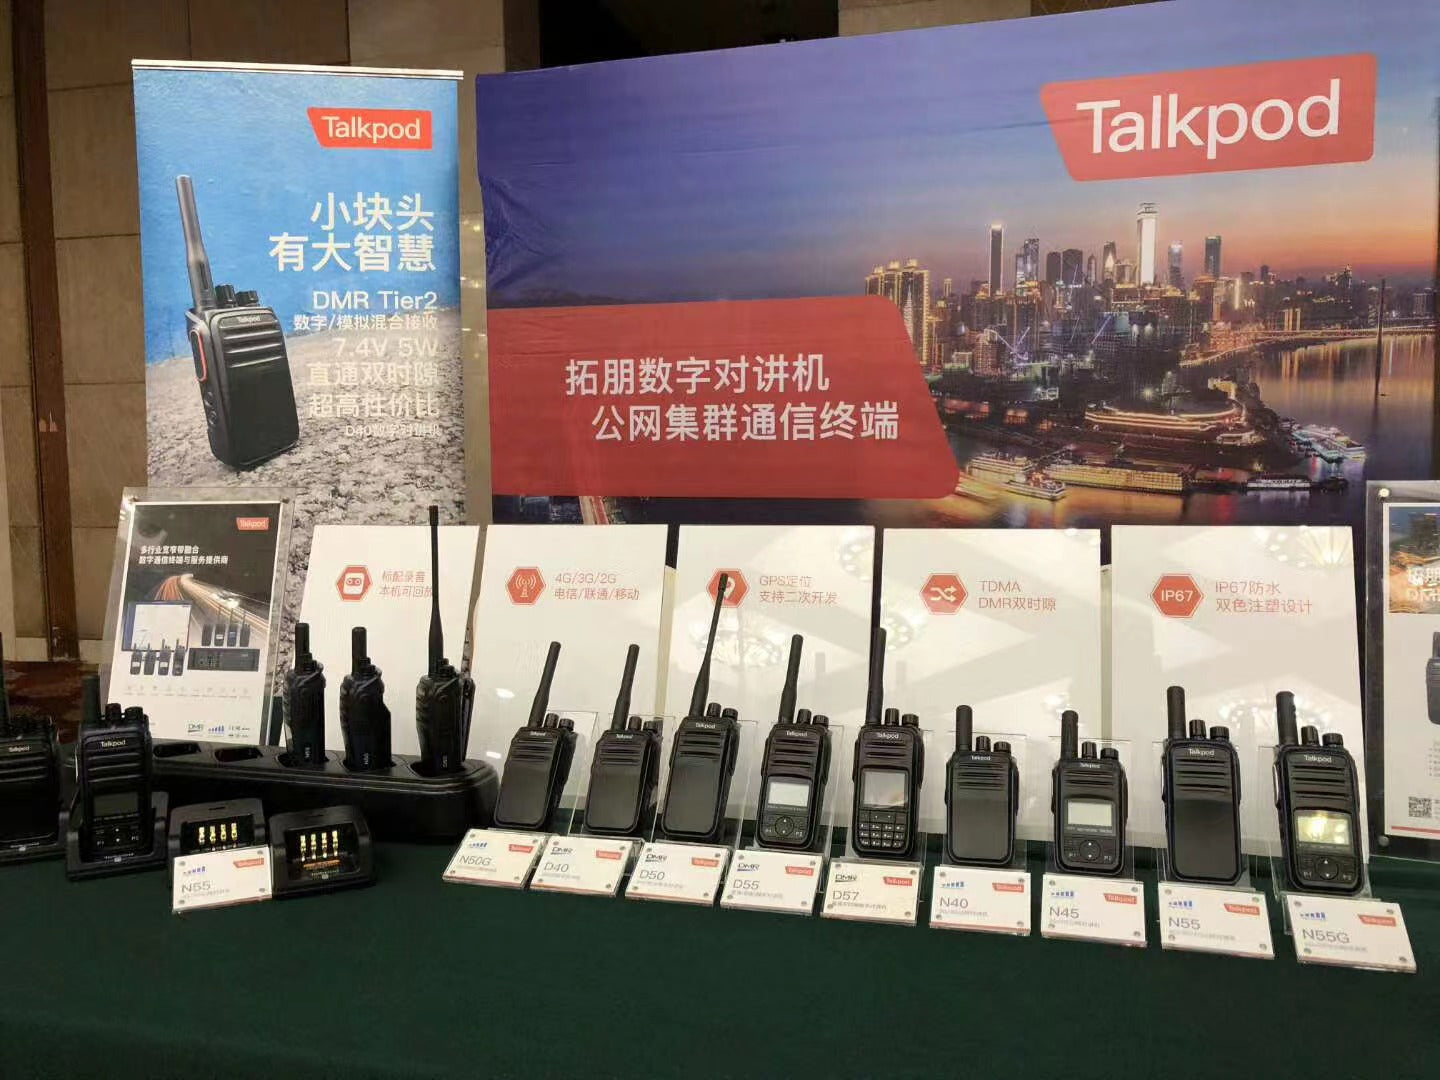 Talkpod Unveils the New D40: Compact, Cost-effective, and Ready for Chongqing's Spicy Delights